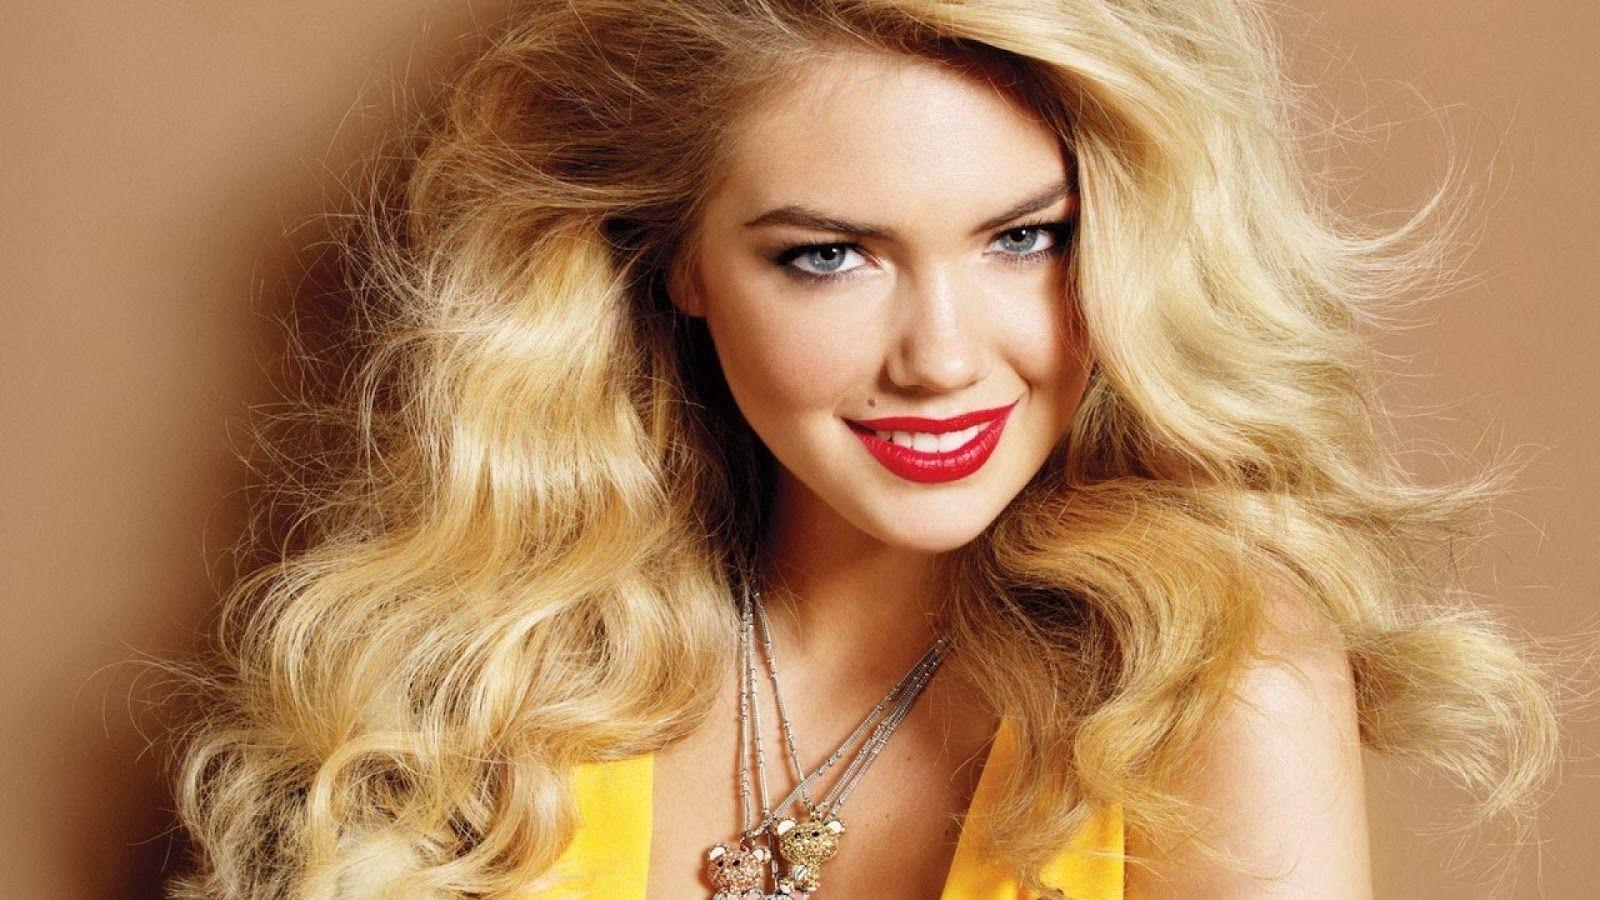 Kate Upton Wallpaper 1920x1080 (78+ pictures)